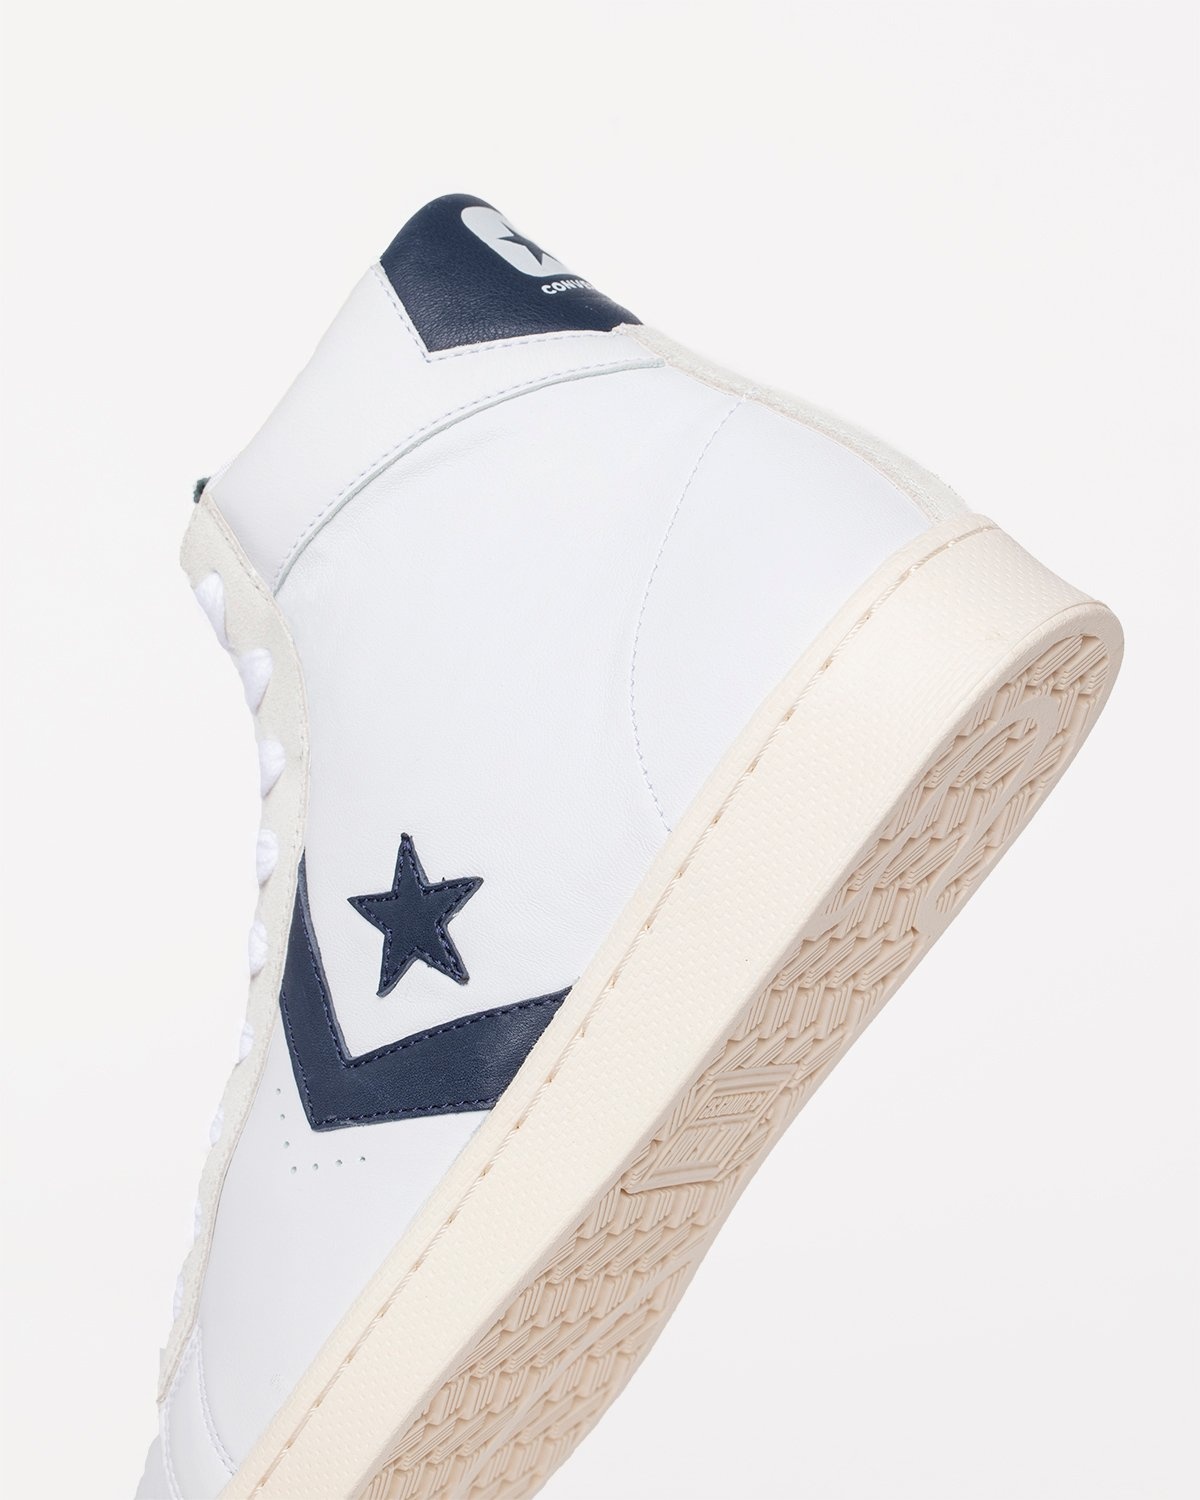 Converse – Pro Leather OG Mid White/Obsidian/Egret - Sneakers - White - Image 2